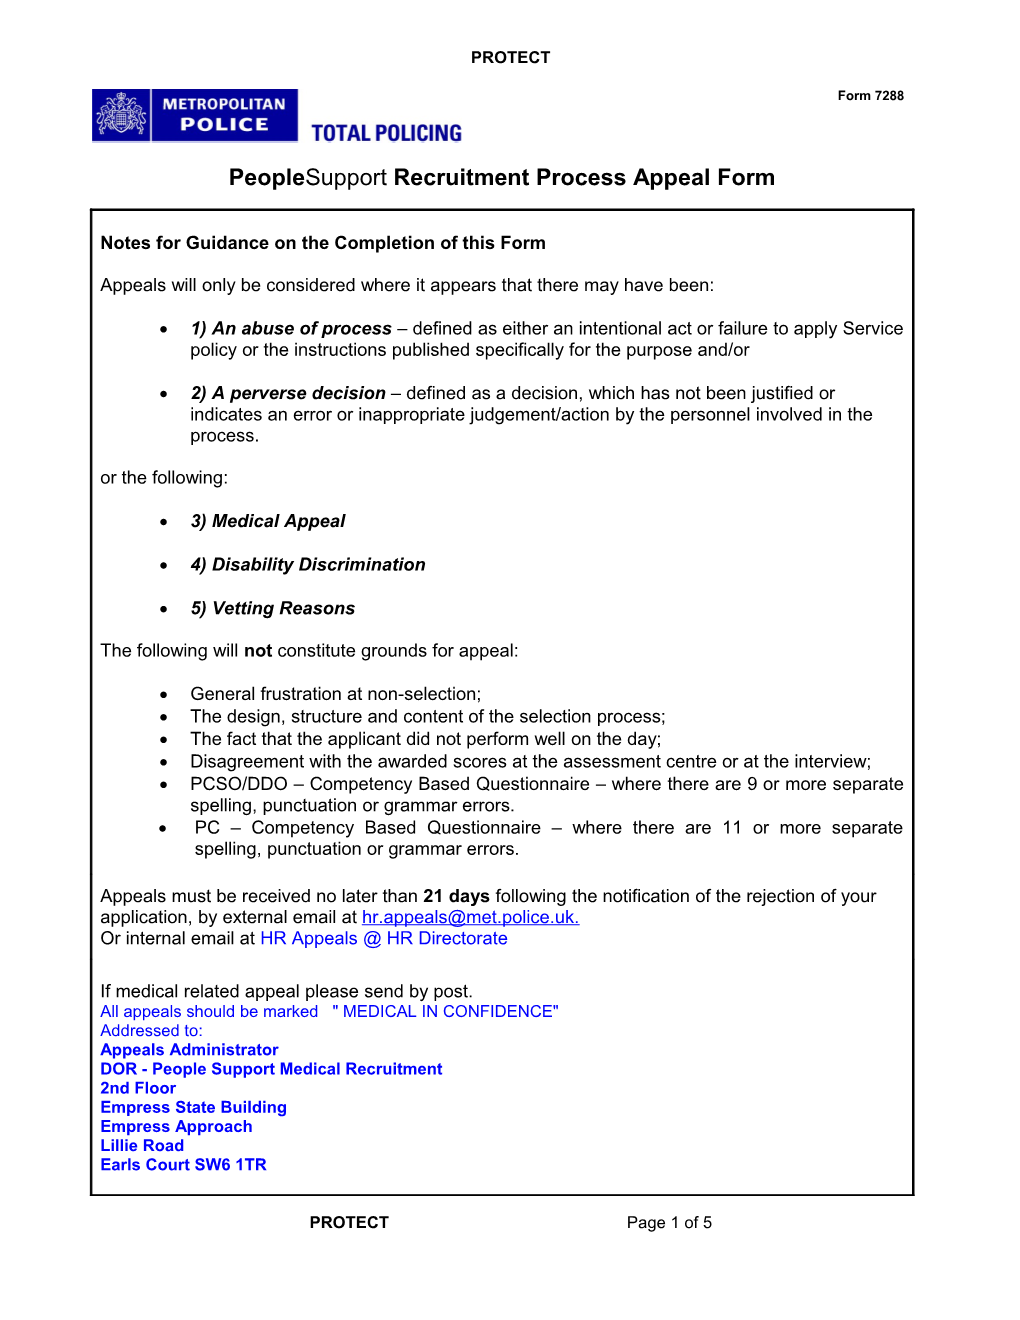 Form 7288 - Peoplesupport Recruitment Process Appeal Form